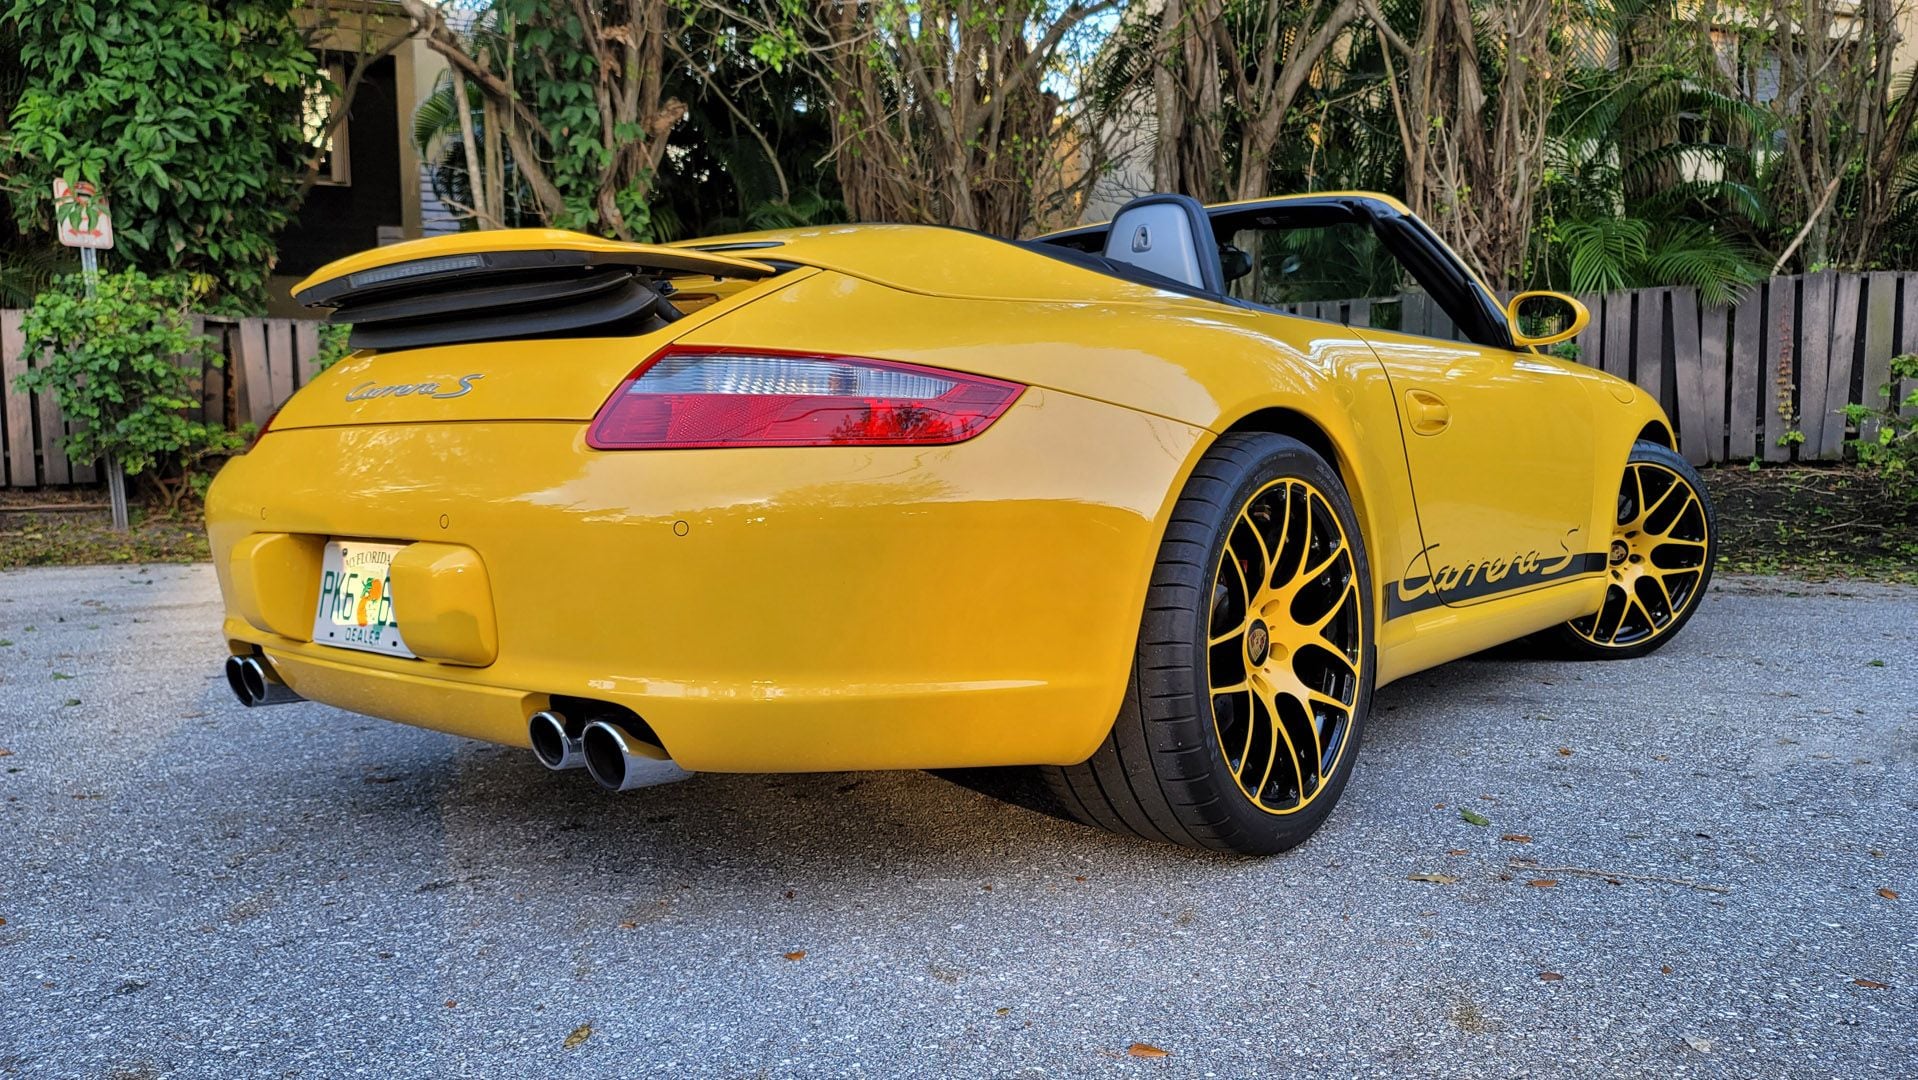 2008 Porsche 911 - 2008 Porsche 911 Carrera S Cab. Speed Yellow. 6MT 20k miles - Used - VIN 00000000000000000 - 20,566 Miles - 6 cyl - 2WD - Manual - Convertible - Yellow - Ft. Lauderdale, FL 33314, United States